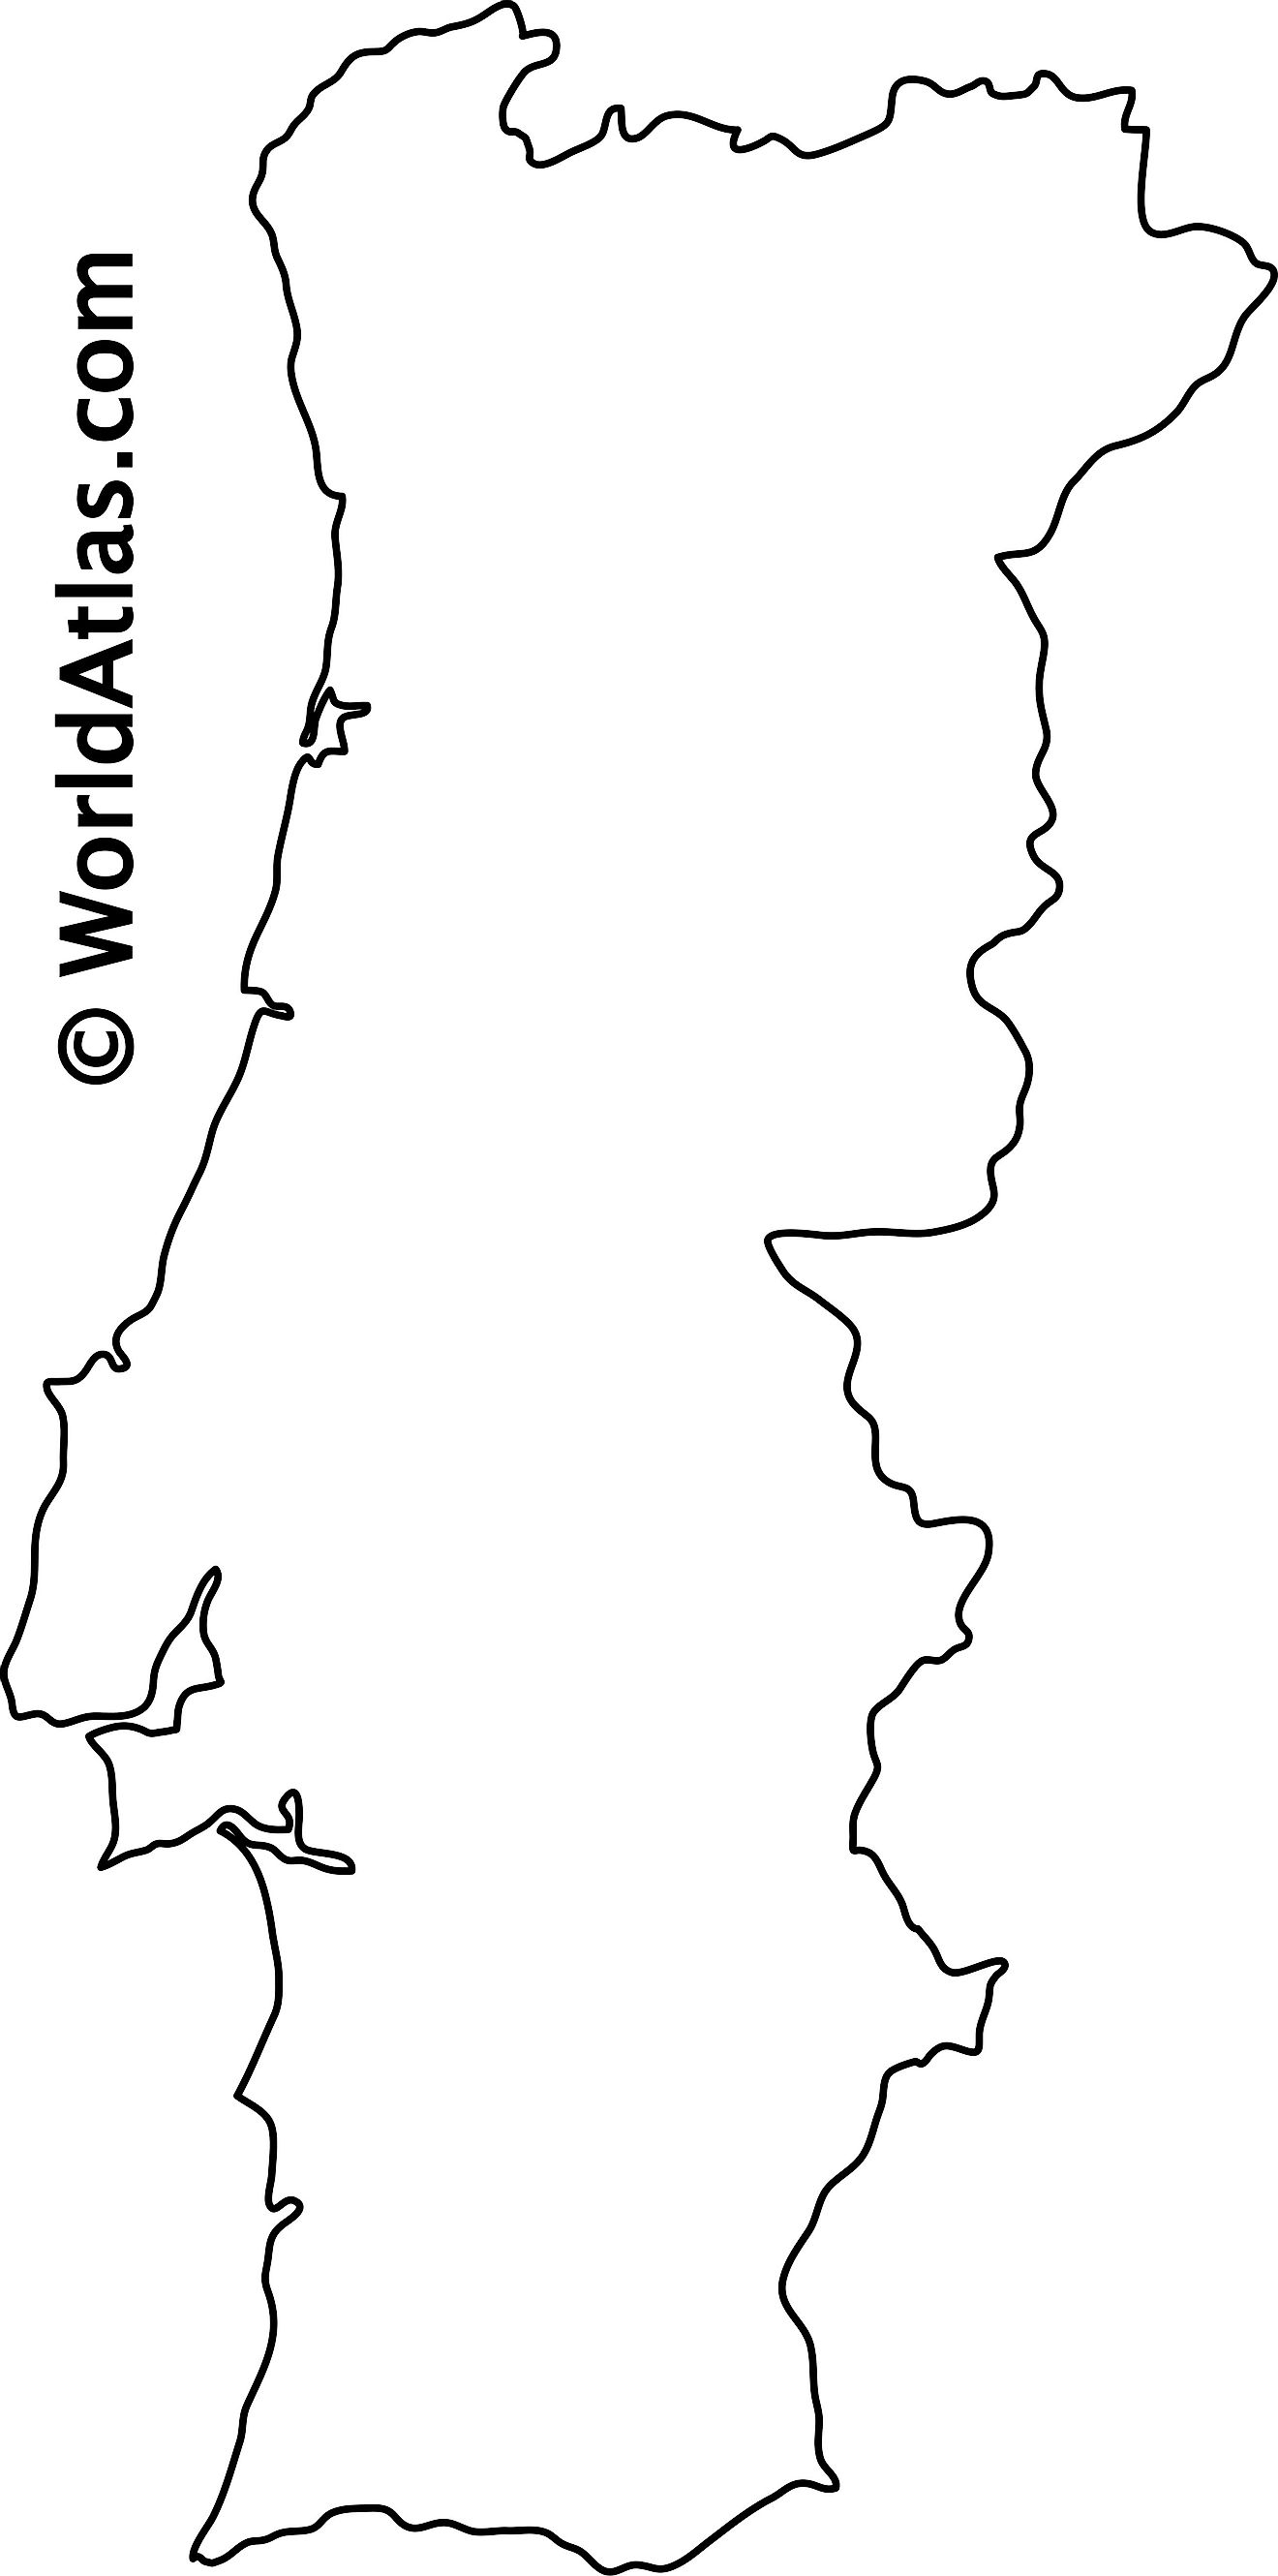 Blank Outline Map of Portugal